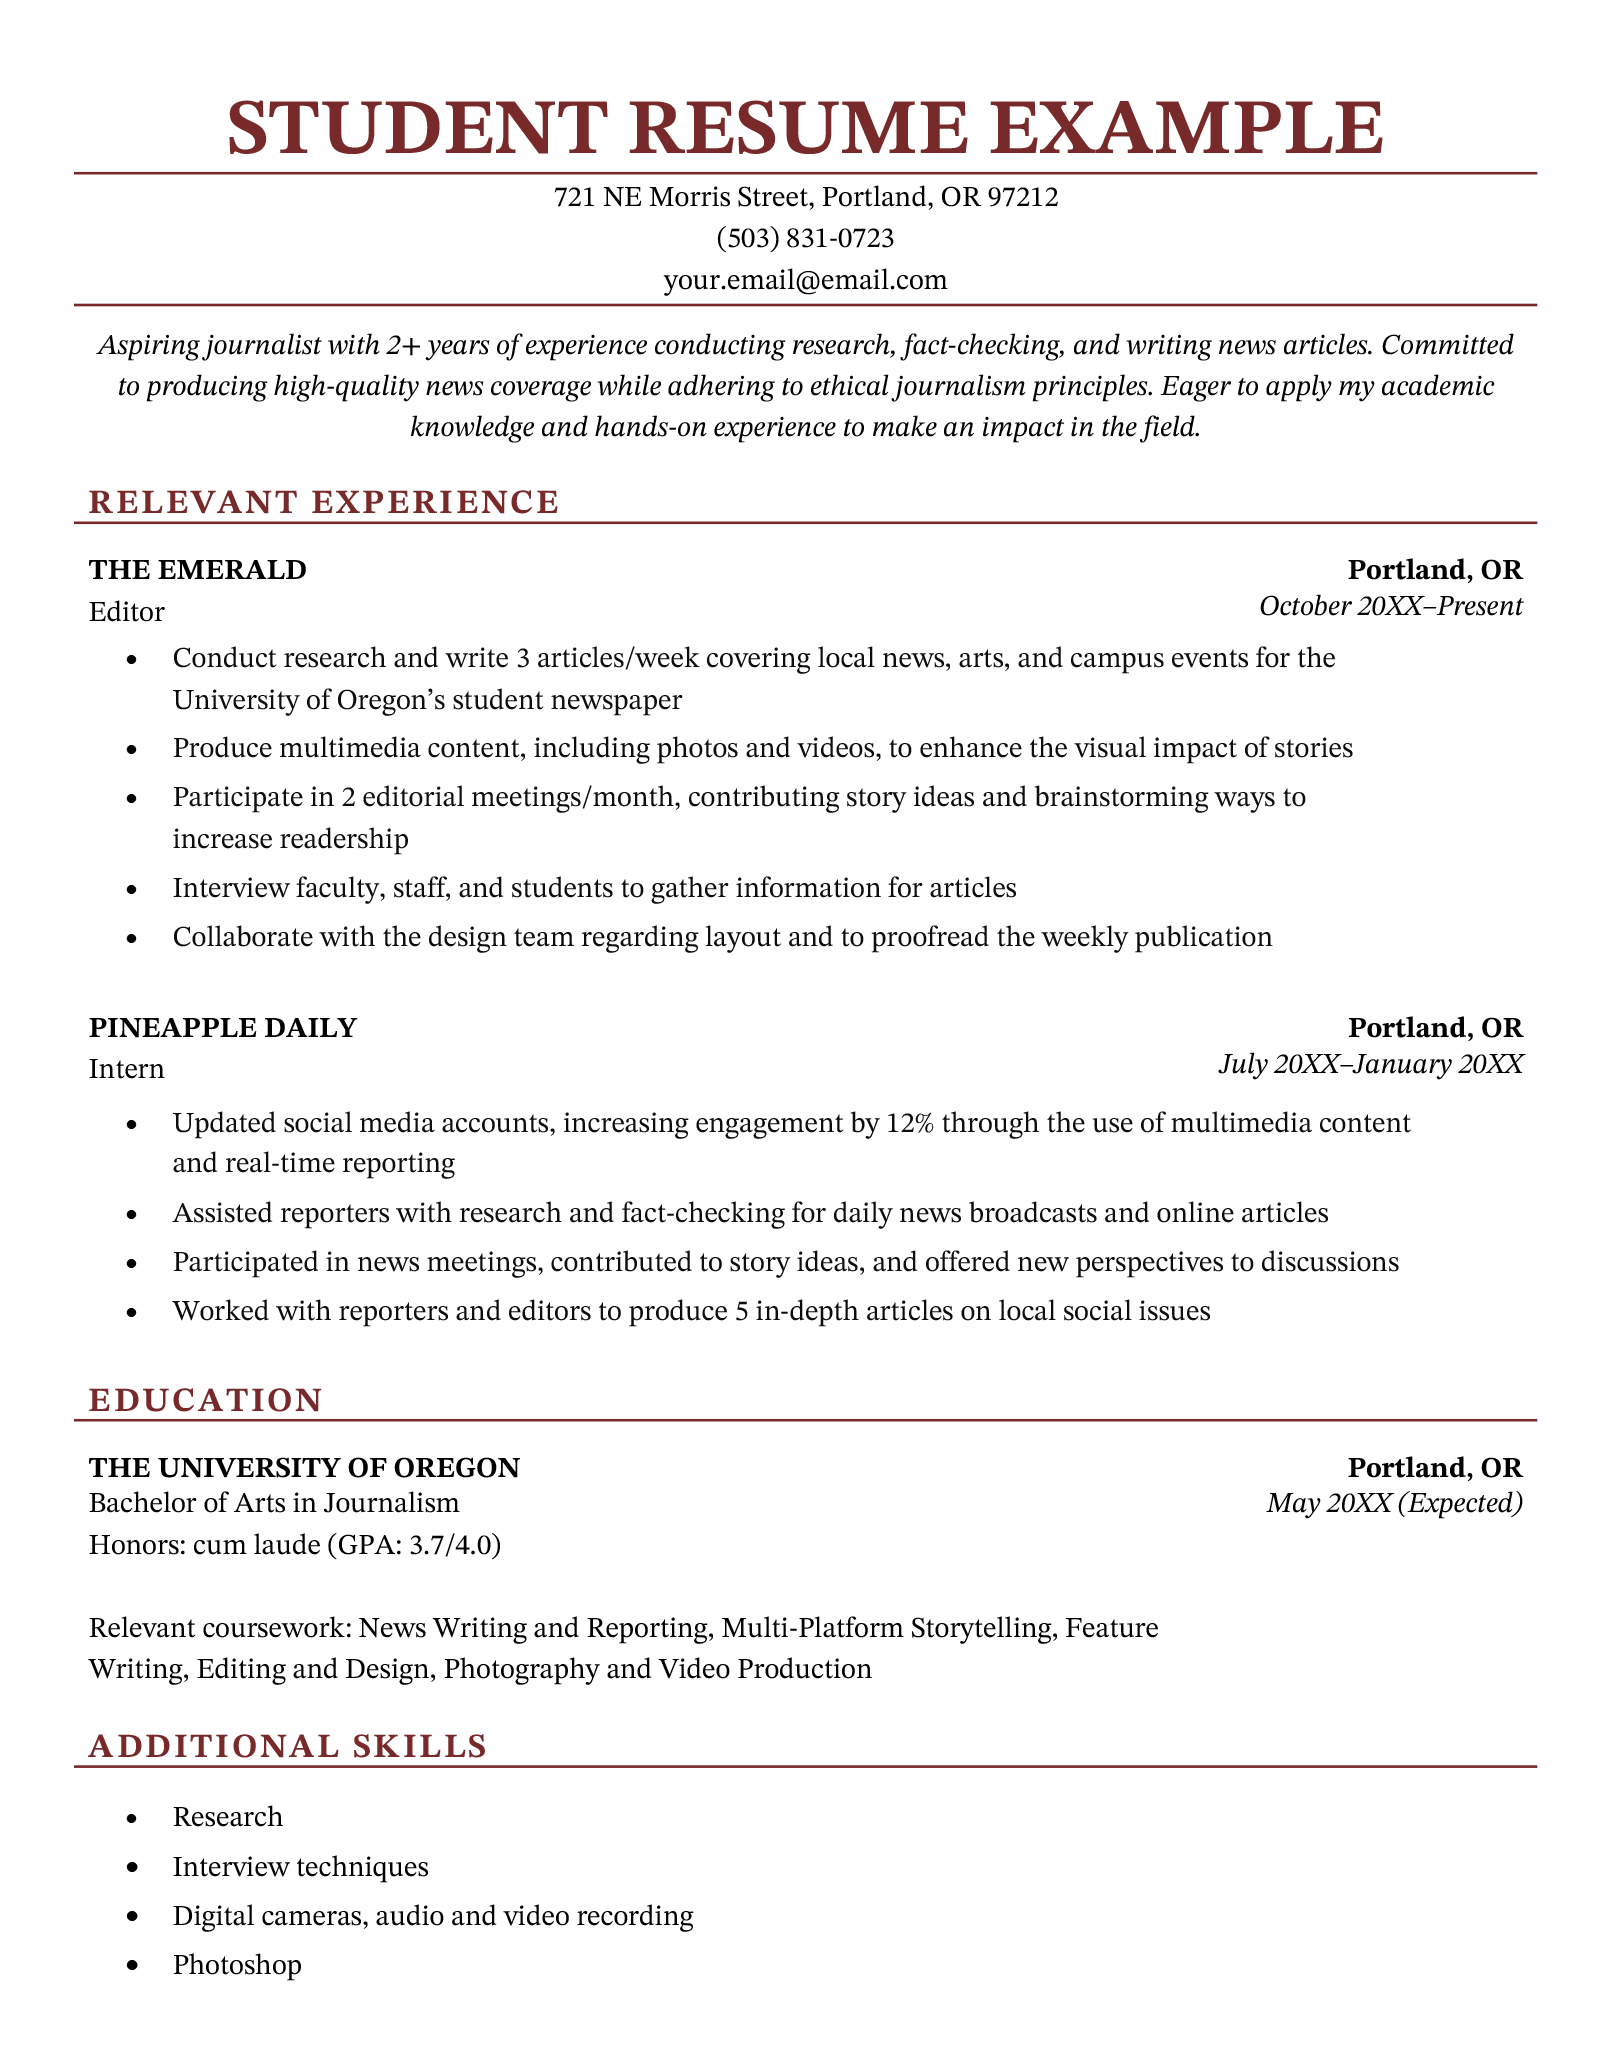 A resume example for a student majoring in journalism